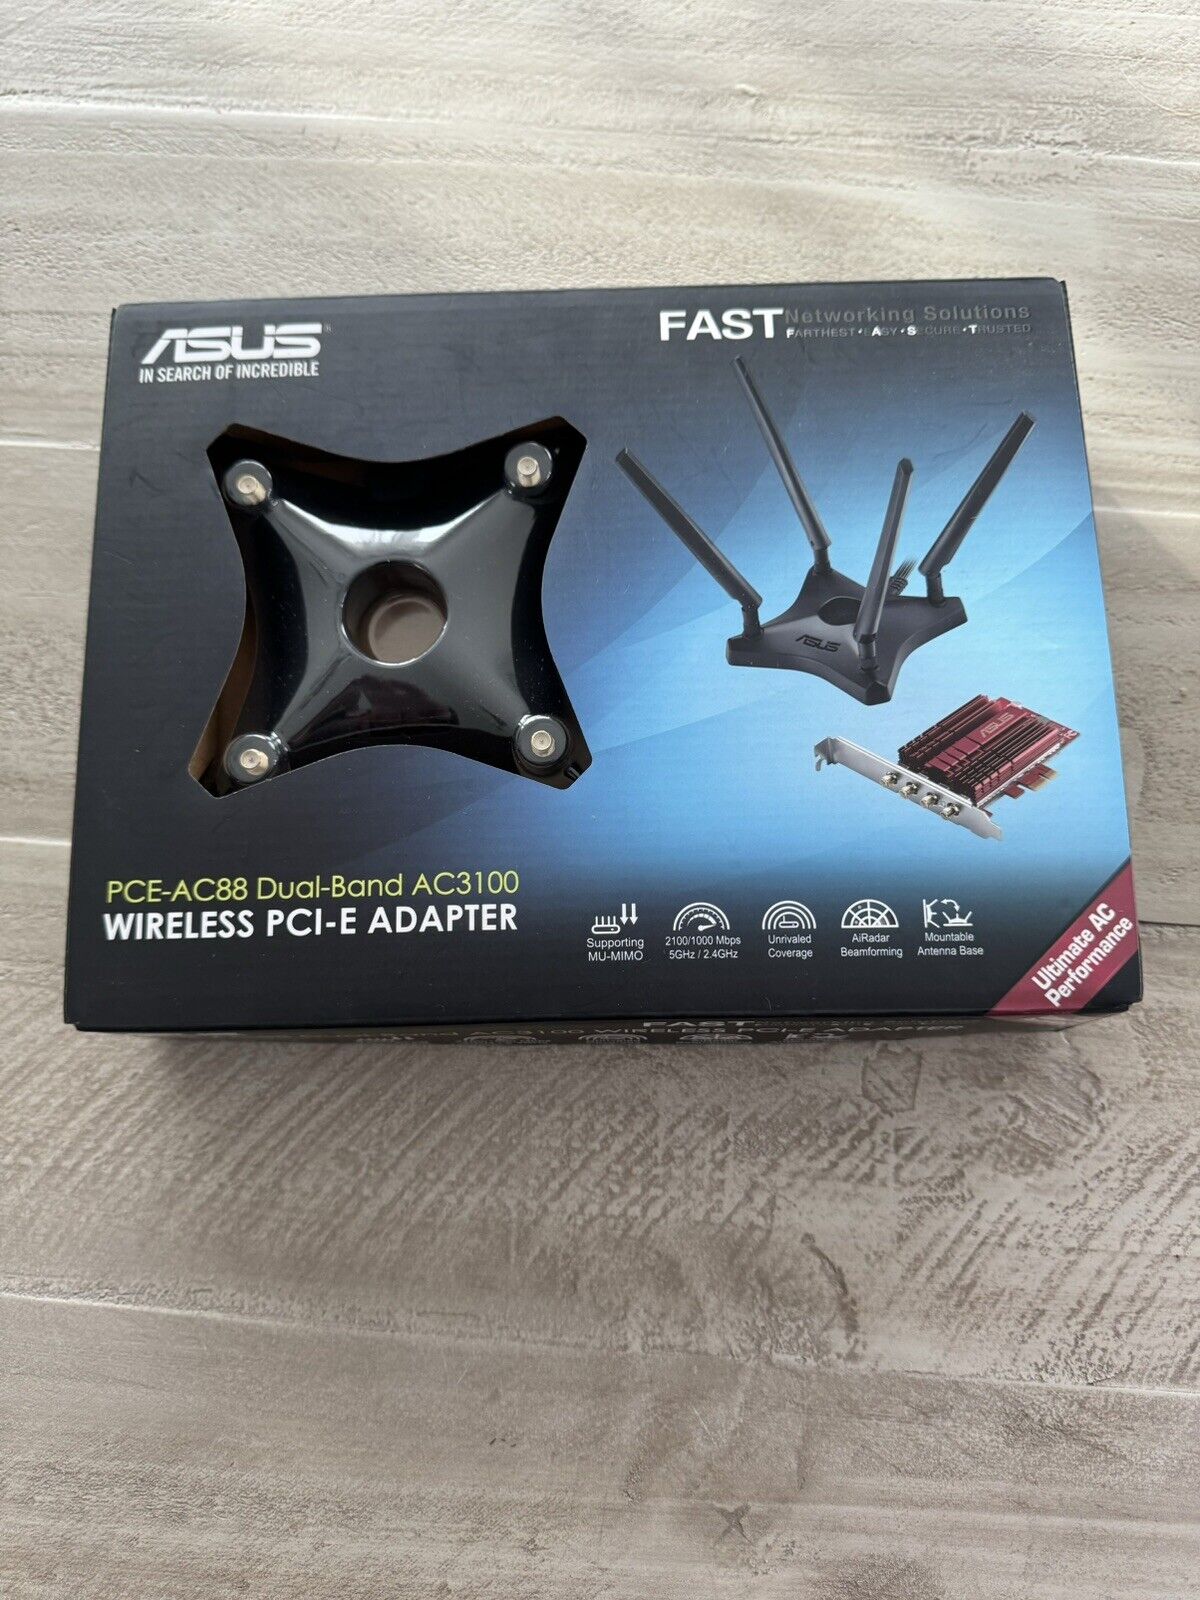 ASUS PCE-AC88 AC3100 Dual Band PCIe WiFi/Wireless Adapter